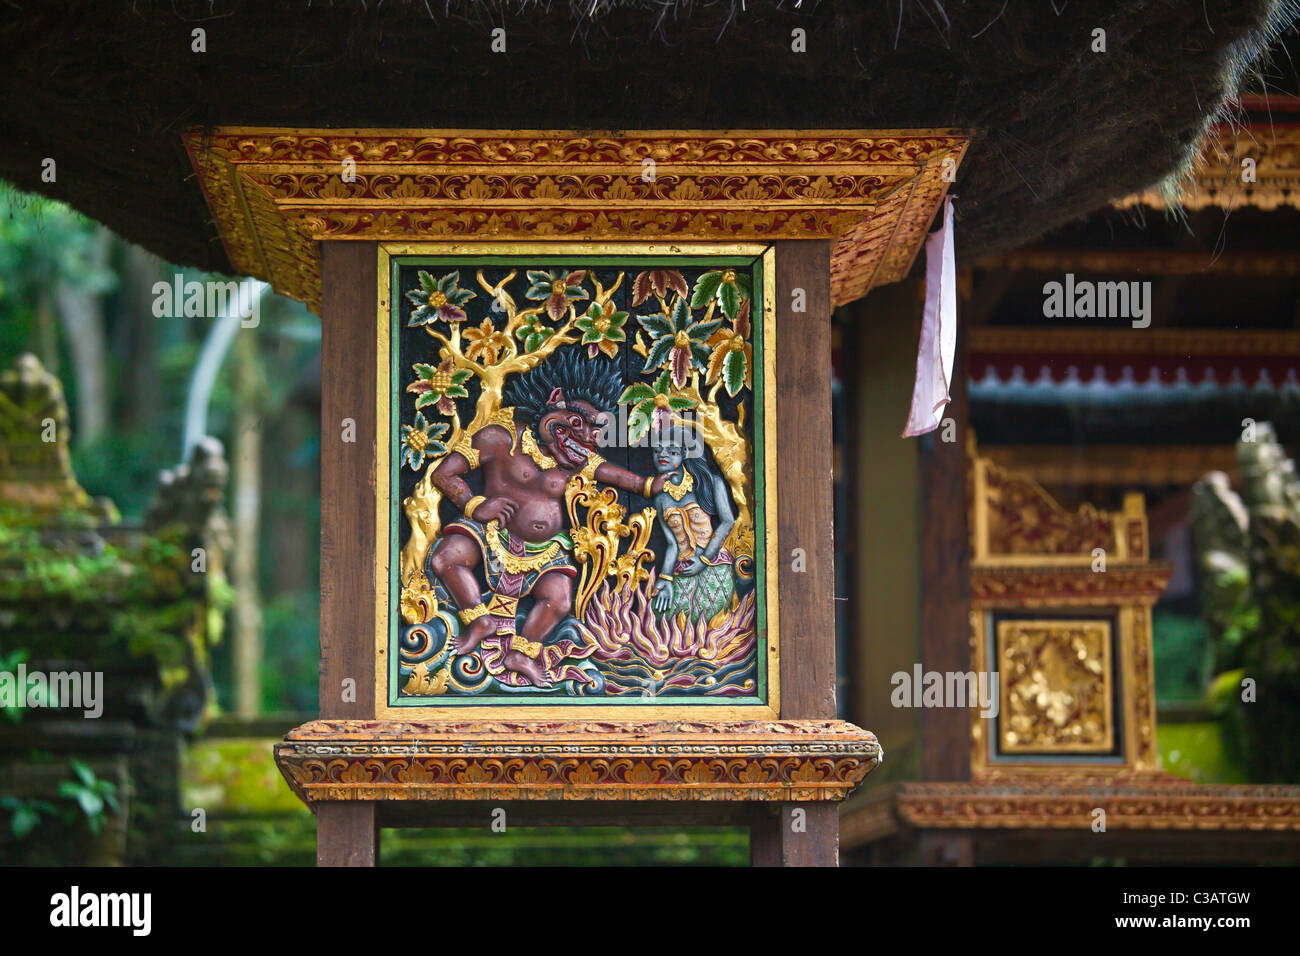 A mythological bas relief at the Hindu temple PURA NAGA SARI is found in THE MONKEY FOREST PARK - UBUD, BALI, INDONESIA Stock Photo